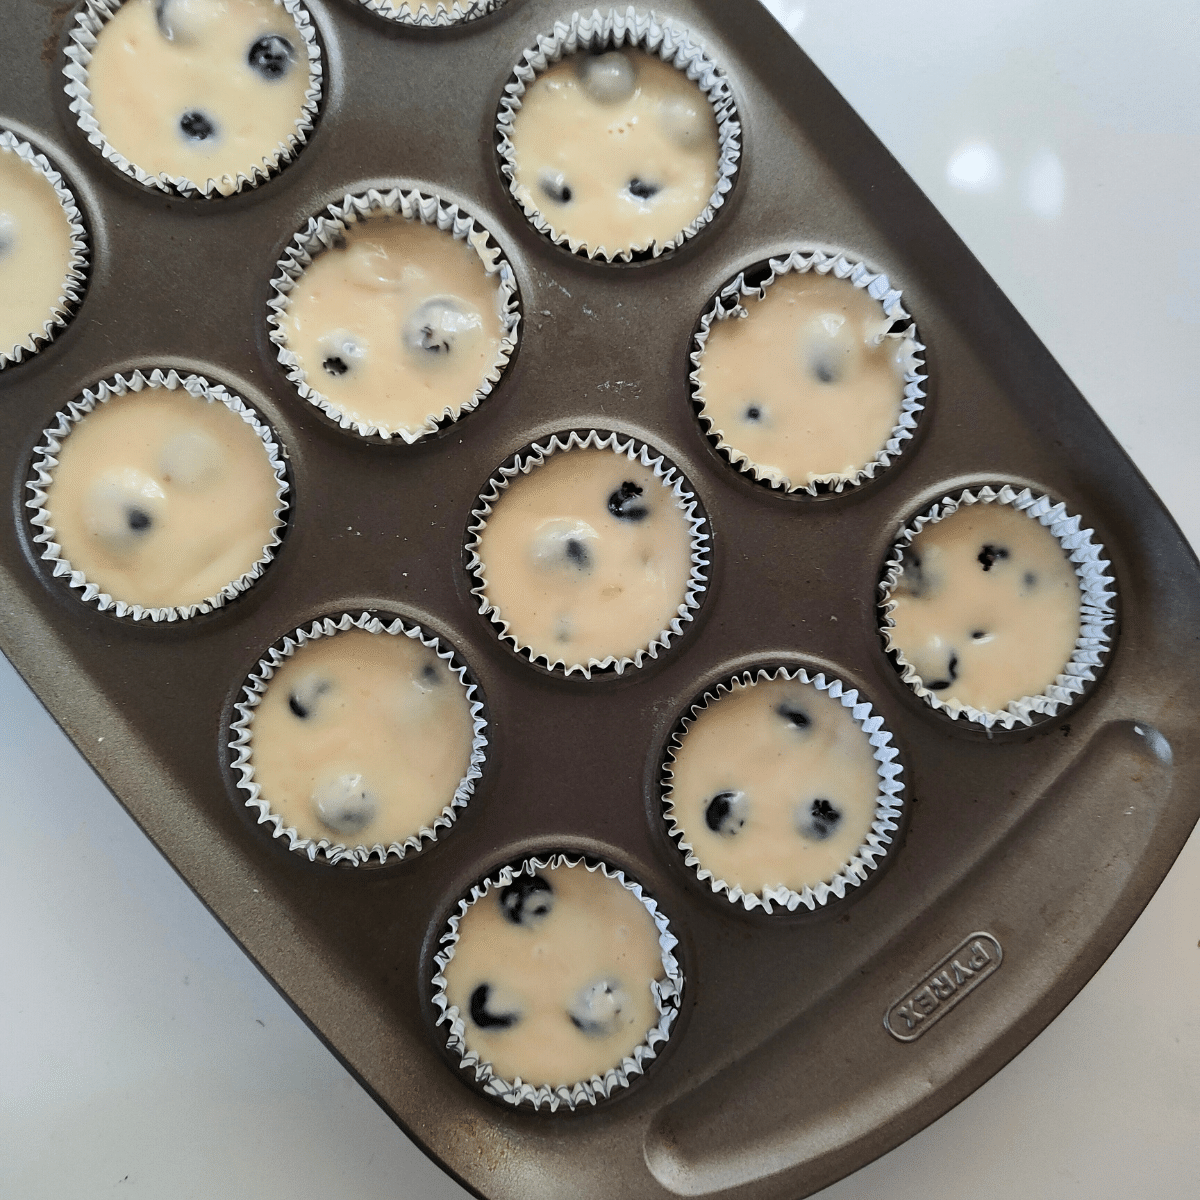 Spoon into a muffin pan